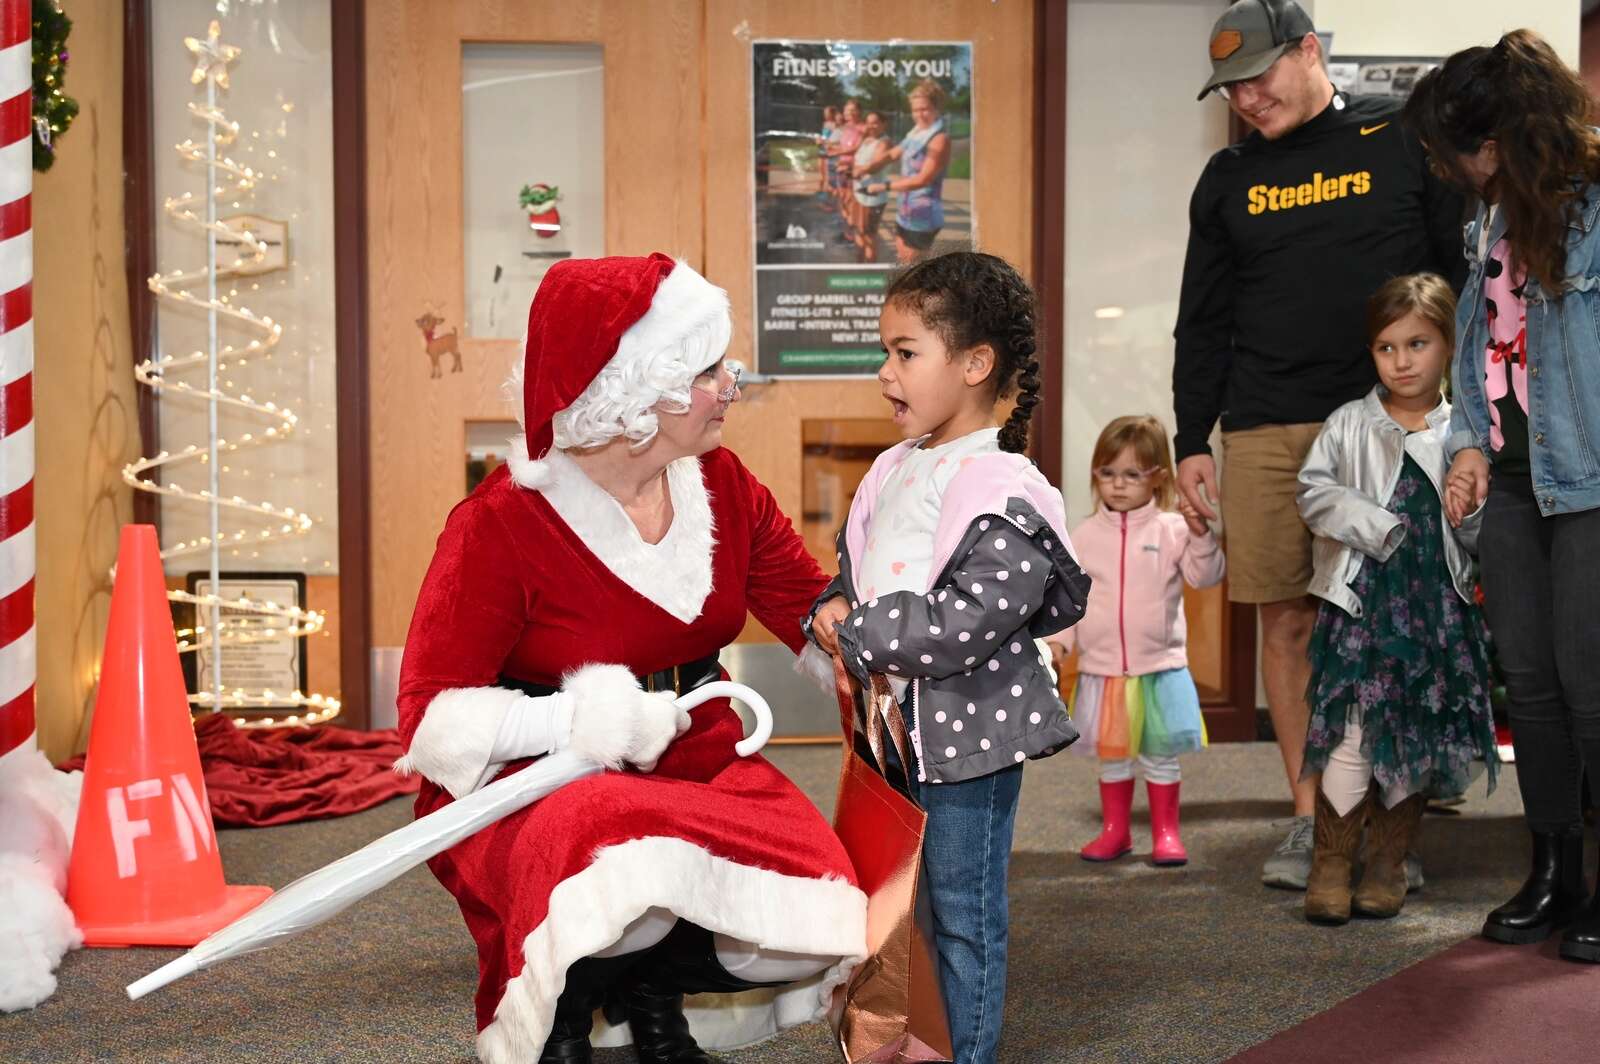 Vivian Morris, 5, of Cranberry Township, discusses her Christmas list with Mrs. Claus